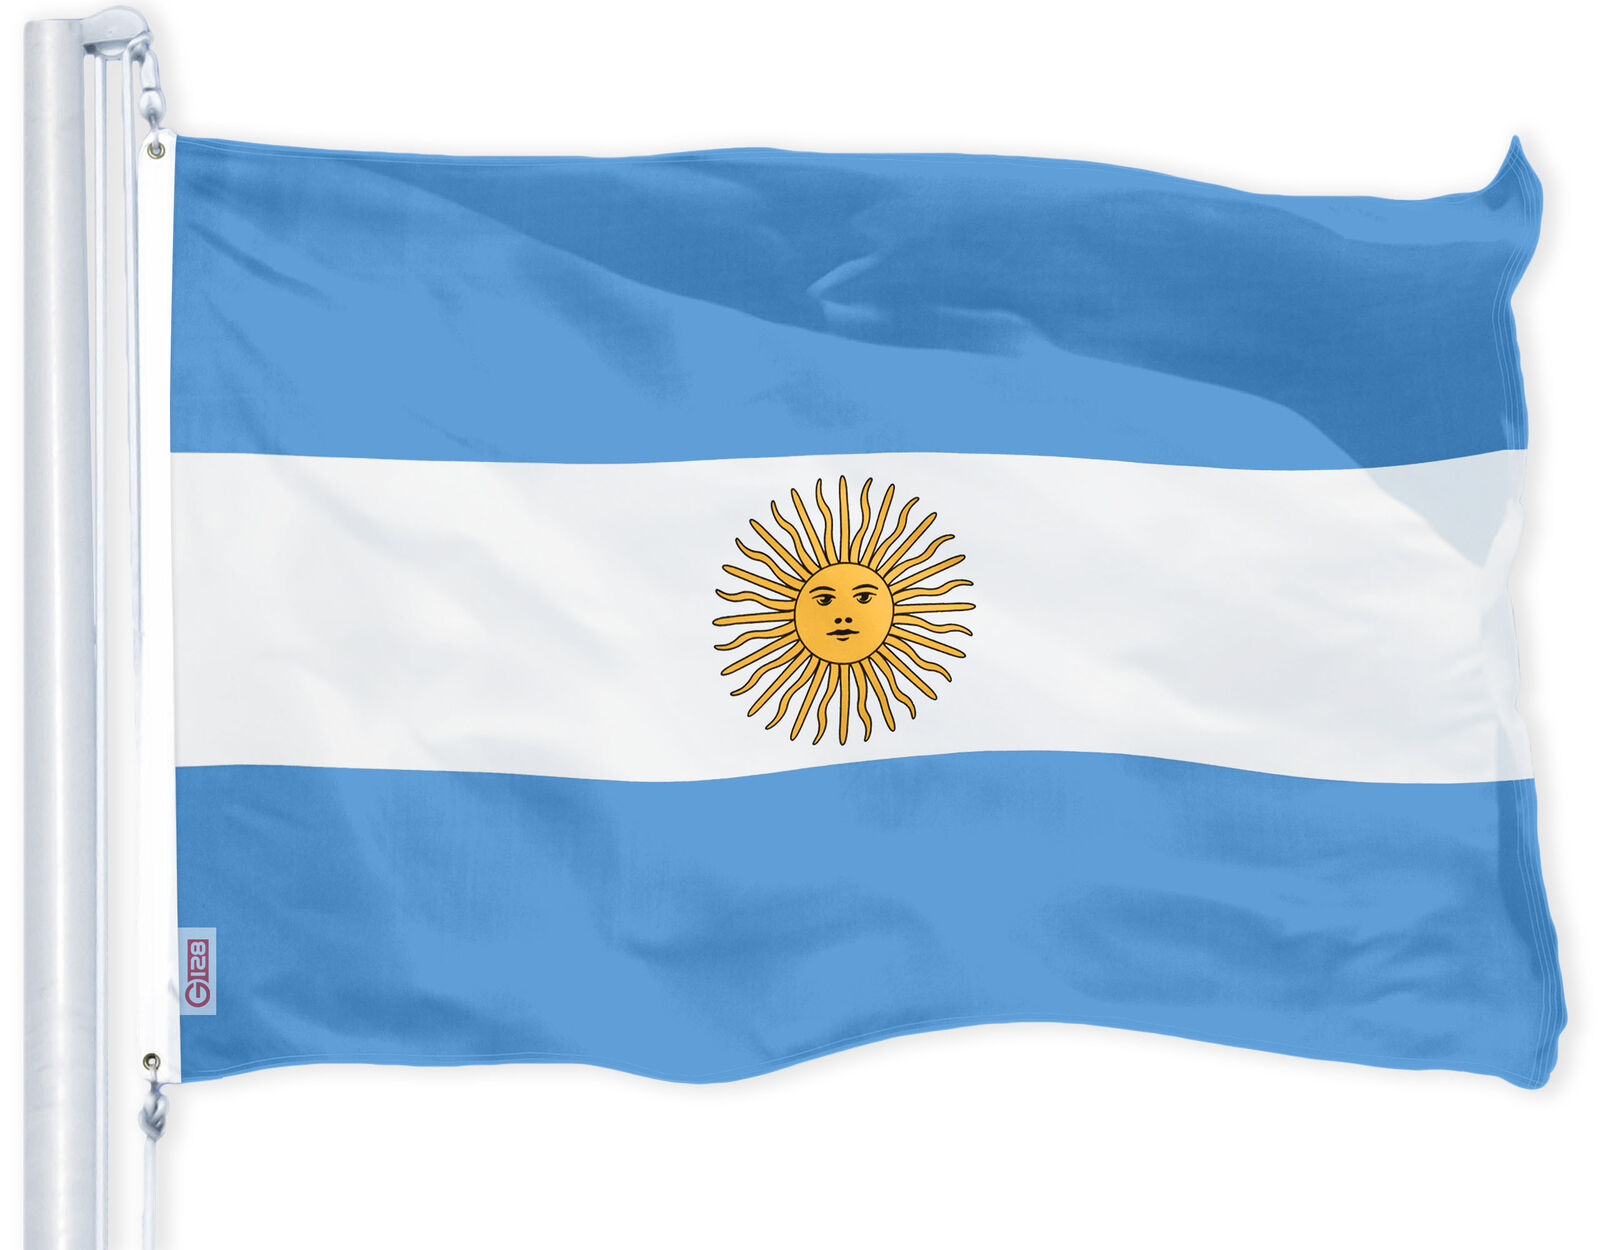 Argentina Argentinian Flag 3x5 FT Printed 150D Polyester By G128